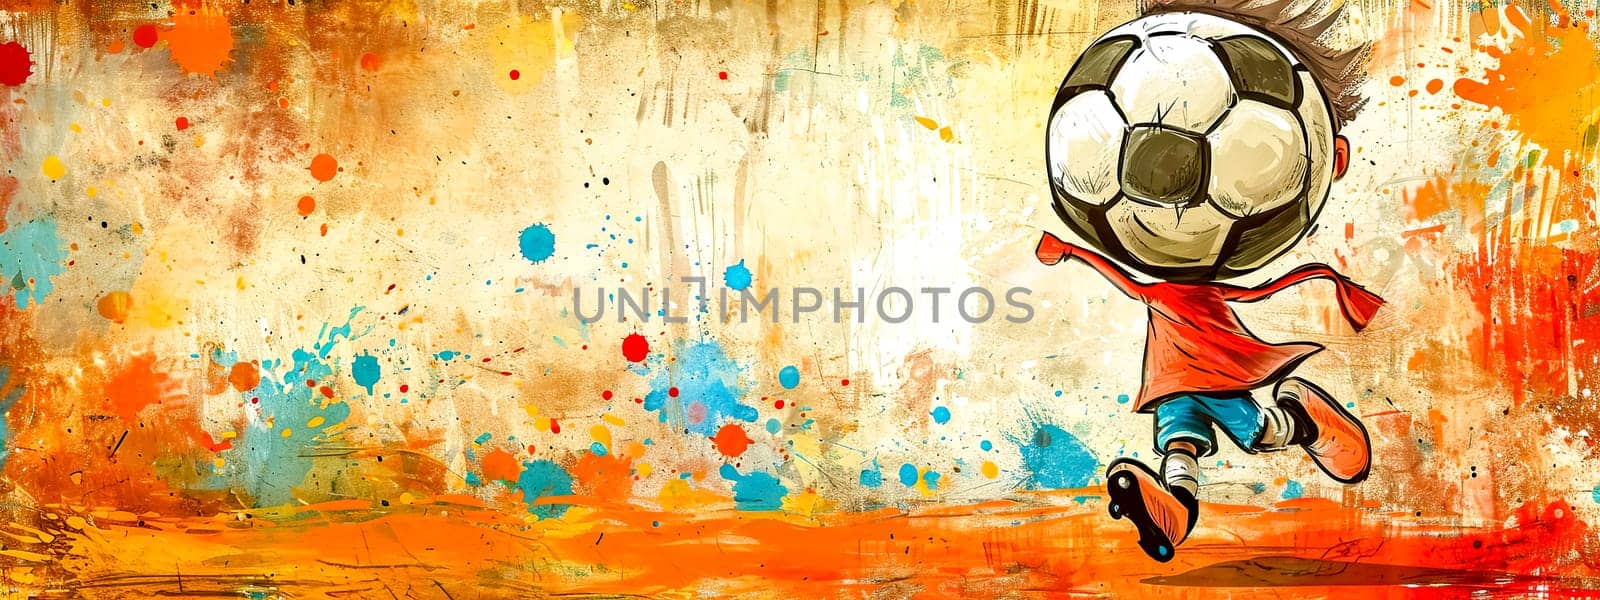 soccer ball character wearing a red cape, mid-action against a vibrant abstract background splashed with orange, blue, and red, perfect for a dynamic sports event banner with ample text space.